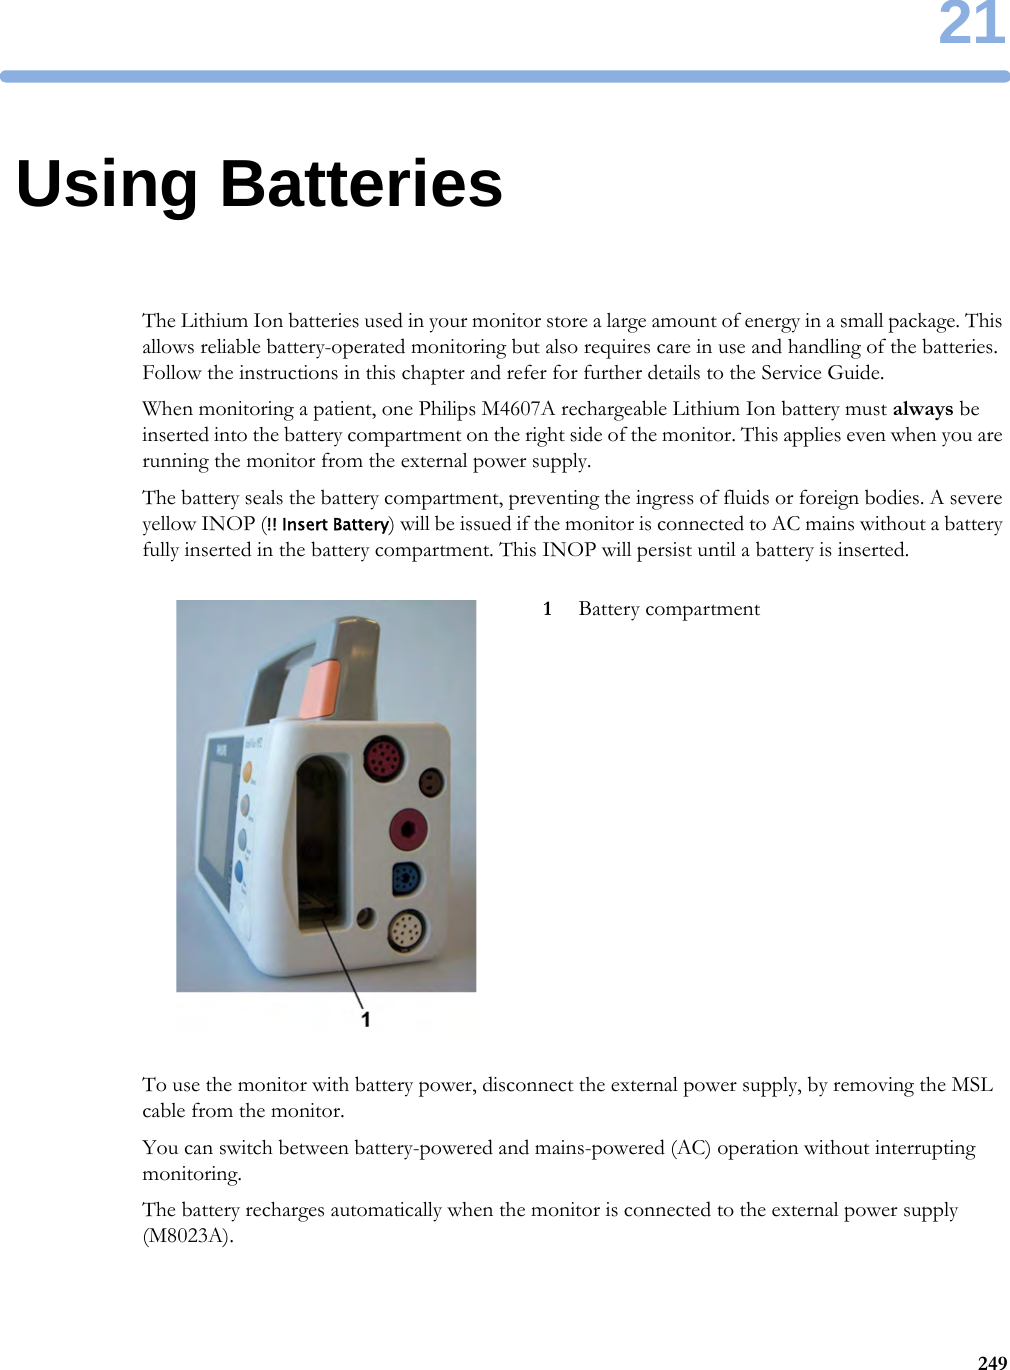 2124921Using BatteriesThe Lithium Ion batteries used in your monitor store a large amount of energy in a small package. This allows reliable battery-operated monitoring but also requires care in use and handling of the batteries. Follow the instructions in this chapter and refer for further details to the Service Guide.When monitoring a patient, one Philips M4607A rechargeable Lithium Ion battery must always be inserted into the battery compartment on the right side of the monitor. This applies even when you are running the monitor from the external power supply.The battery seals the battery compartment, preventing the ingress of fluids or foreign bodies. A severe yellow INOP (!! Insert Battery) will be issued if the monitor is connected to AC mains without a battery fully inserted in the battery compartment. This INOP will persist until a battery is inserted.To use the monitor with battery power, disconnect the external power supply, by removing the MSL cable from the monitor.You can switch between battery-powered and mains-powered (AC) operation without interrupting monitoring.The battery recharges automatically when the monitor is connected to the external power supply (M8023A).1Battery compartment